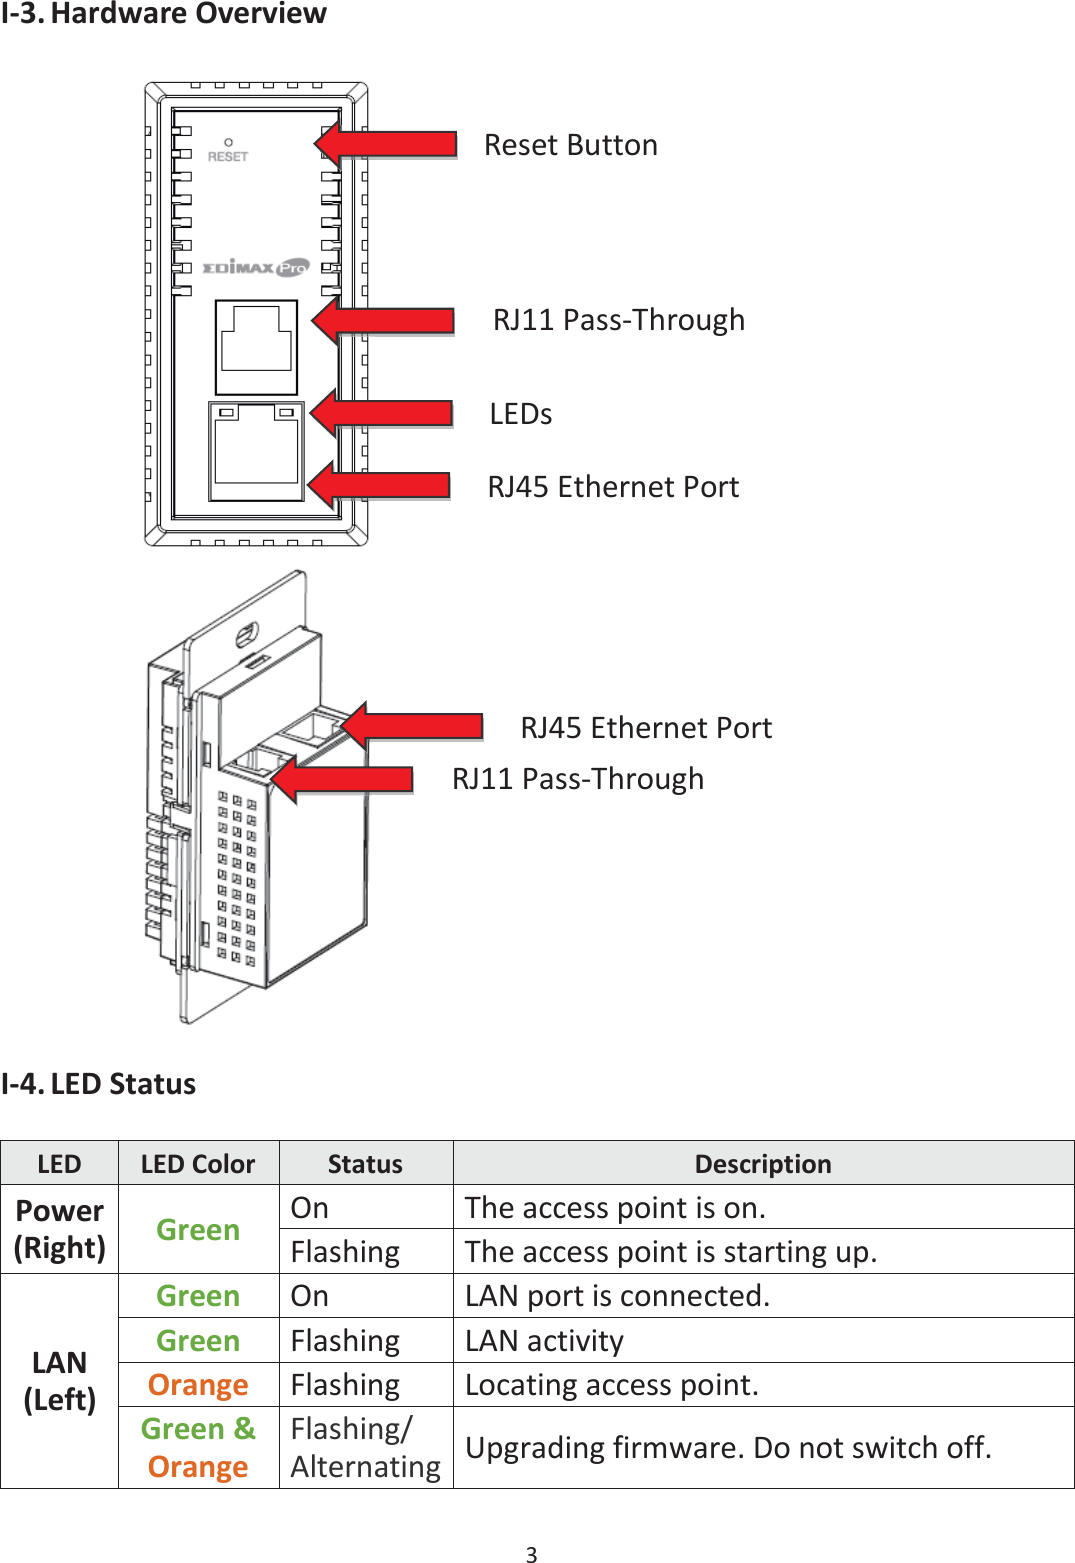 3  I-3. Hardware Overview    I-4. LED Status  LED LED Color Status Description Power (Right) Green On The access point is on. Flashing The access point is starting up. LAN (Left) Green On LAN port is connected. Green  Flashing LAN activity Orange Flashing Locating access point. Green &amp; Orange Flashing/ Alternating Upgrading firmware. Do not switch off. RJ11 Pass-Through LEDs Reset Button RJ11 Pass-Through RJ45 Ethernet Port RJ45 Ethernet Port 